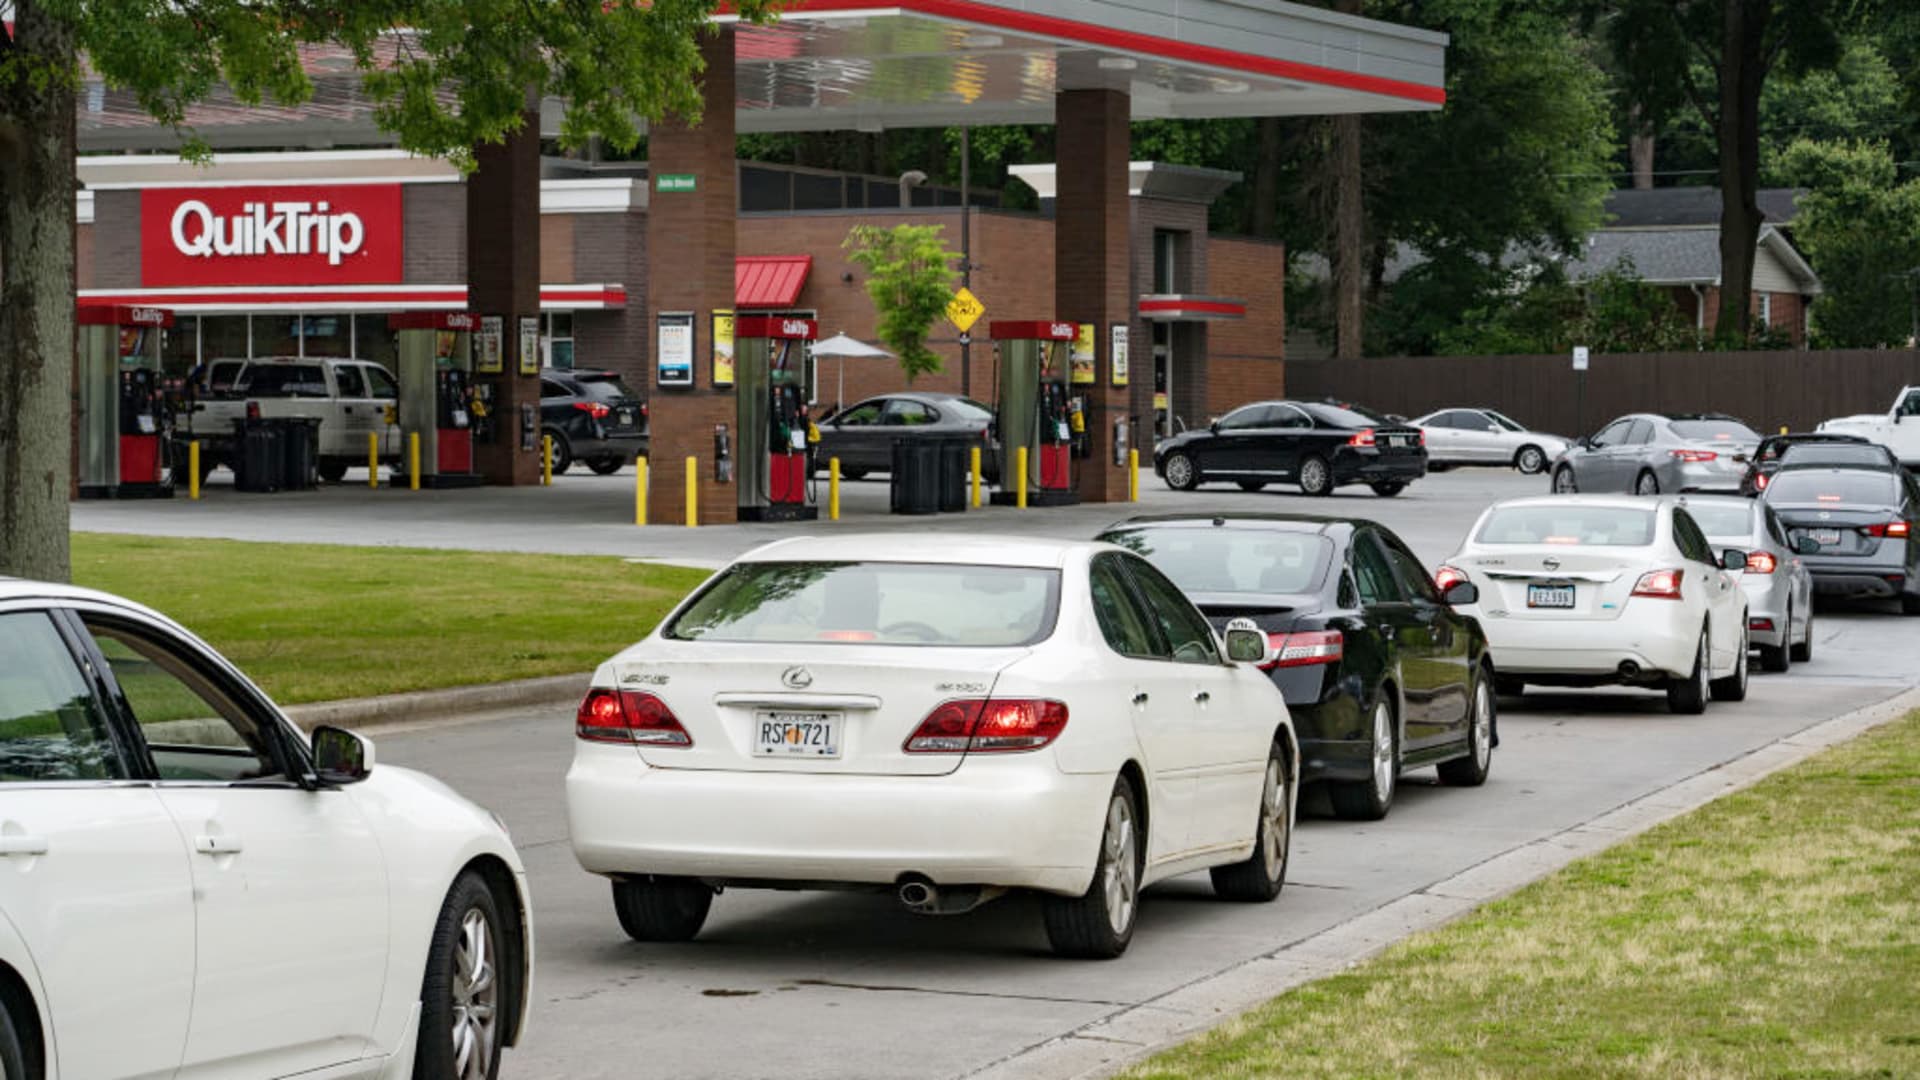 Cars line up at a QuickTrip on May 11, 2021 in Atlanta, Georgia. There is an expectation of a gasoline shortage in Georgia after Georgia-based gas company Colonial Pipeline reported a ransomware attack on May 7.